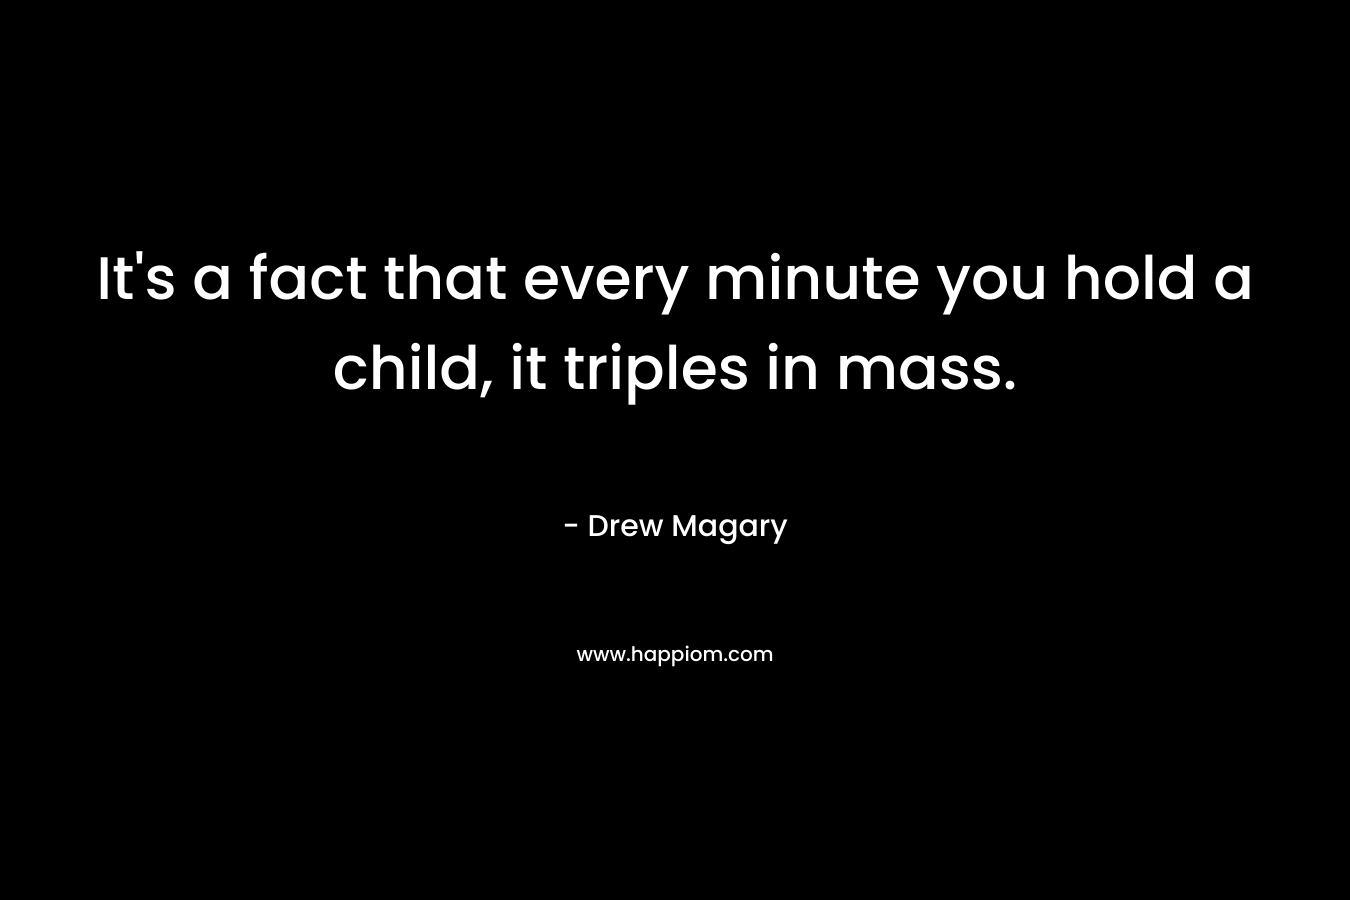 It’s a fact that every minute you hold a child, it triples in mass. – Drew Magary